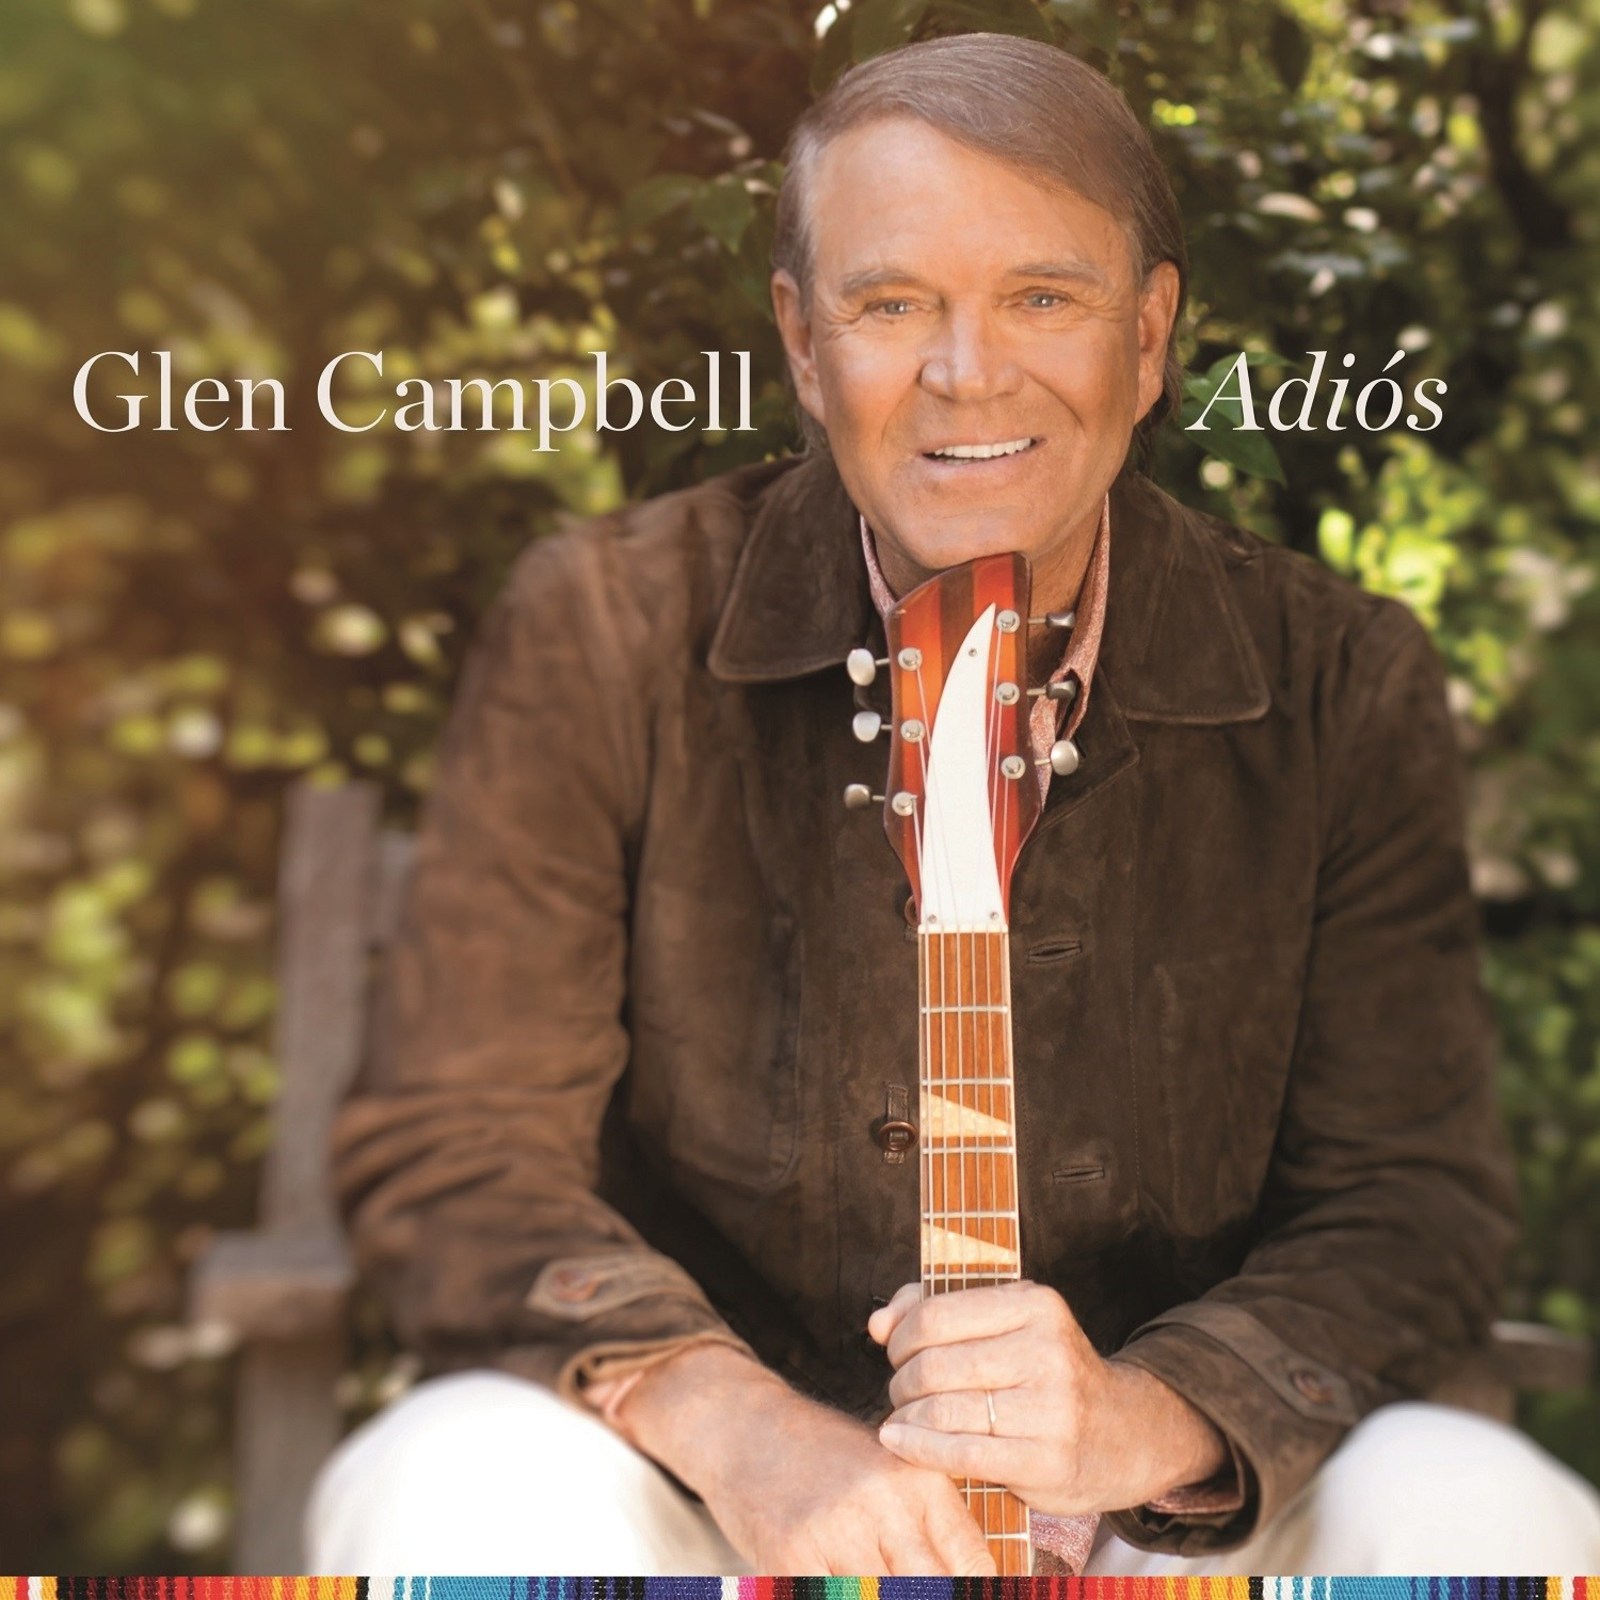 Click on image to purchase Glen Campbell's last album adios